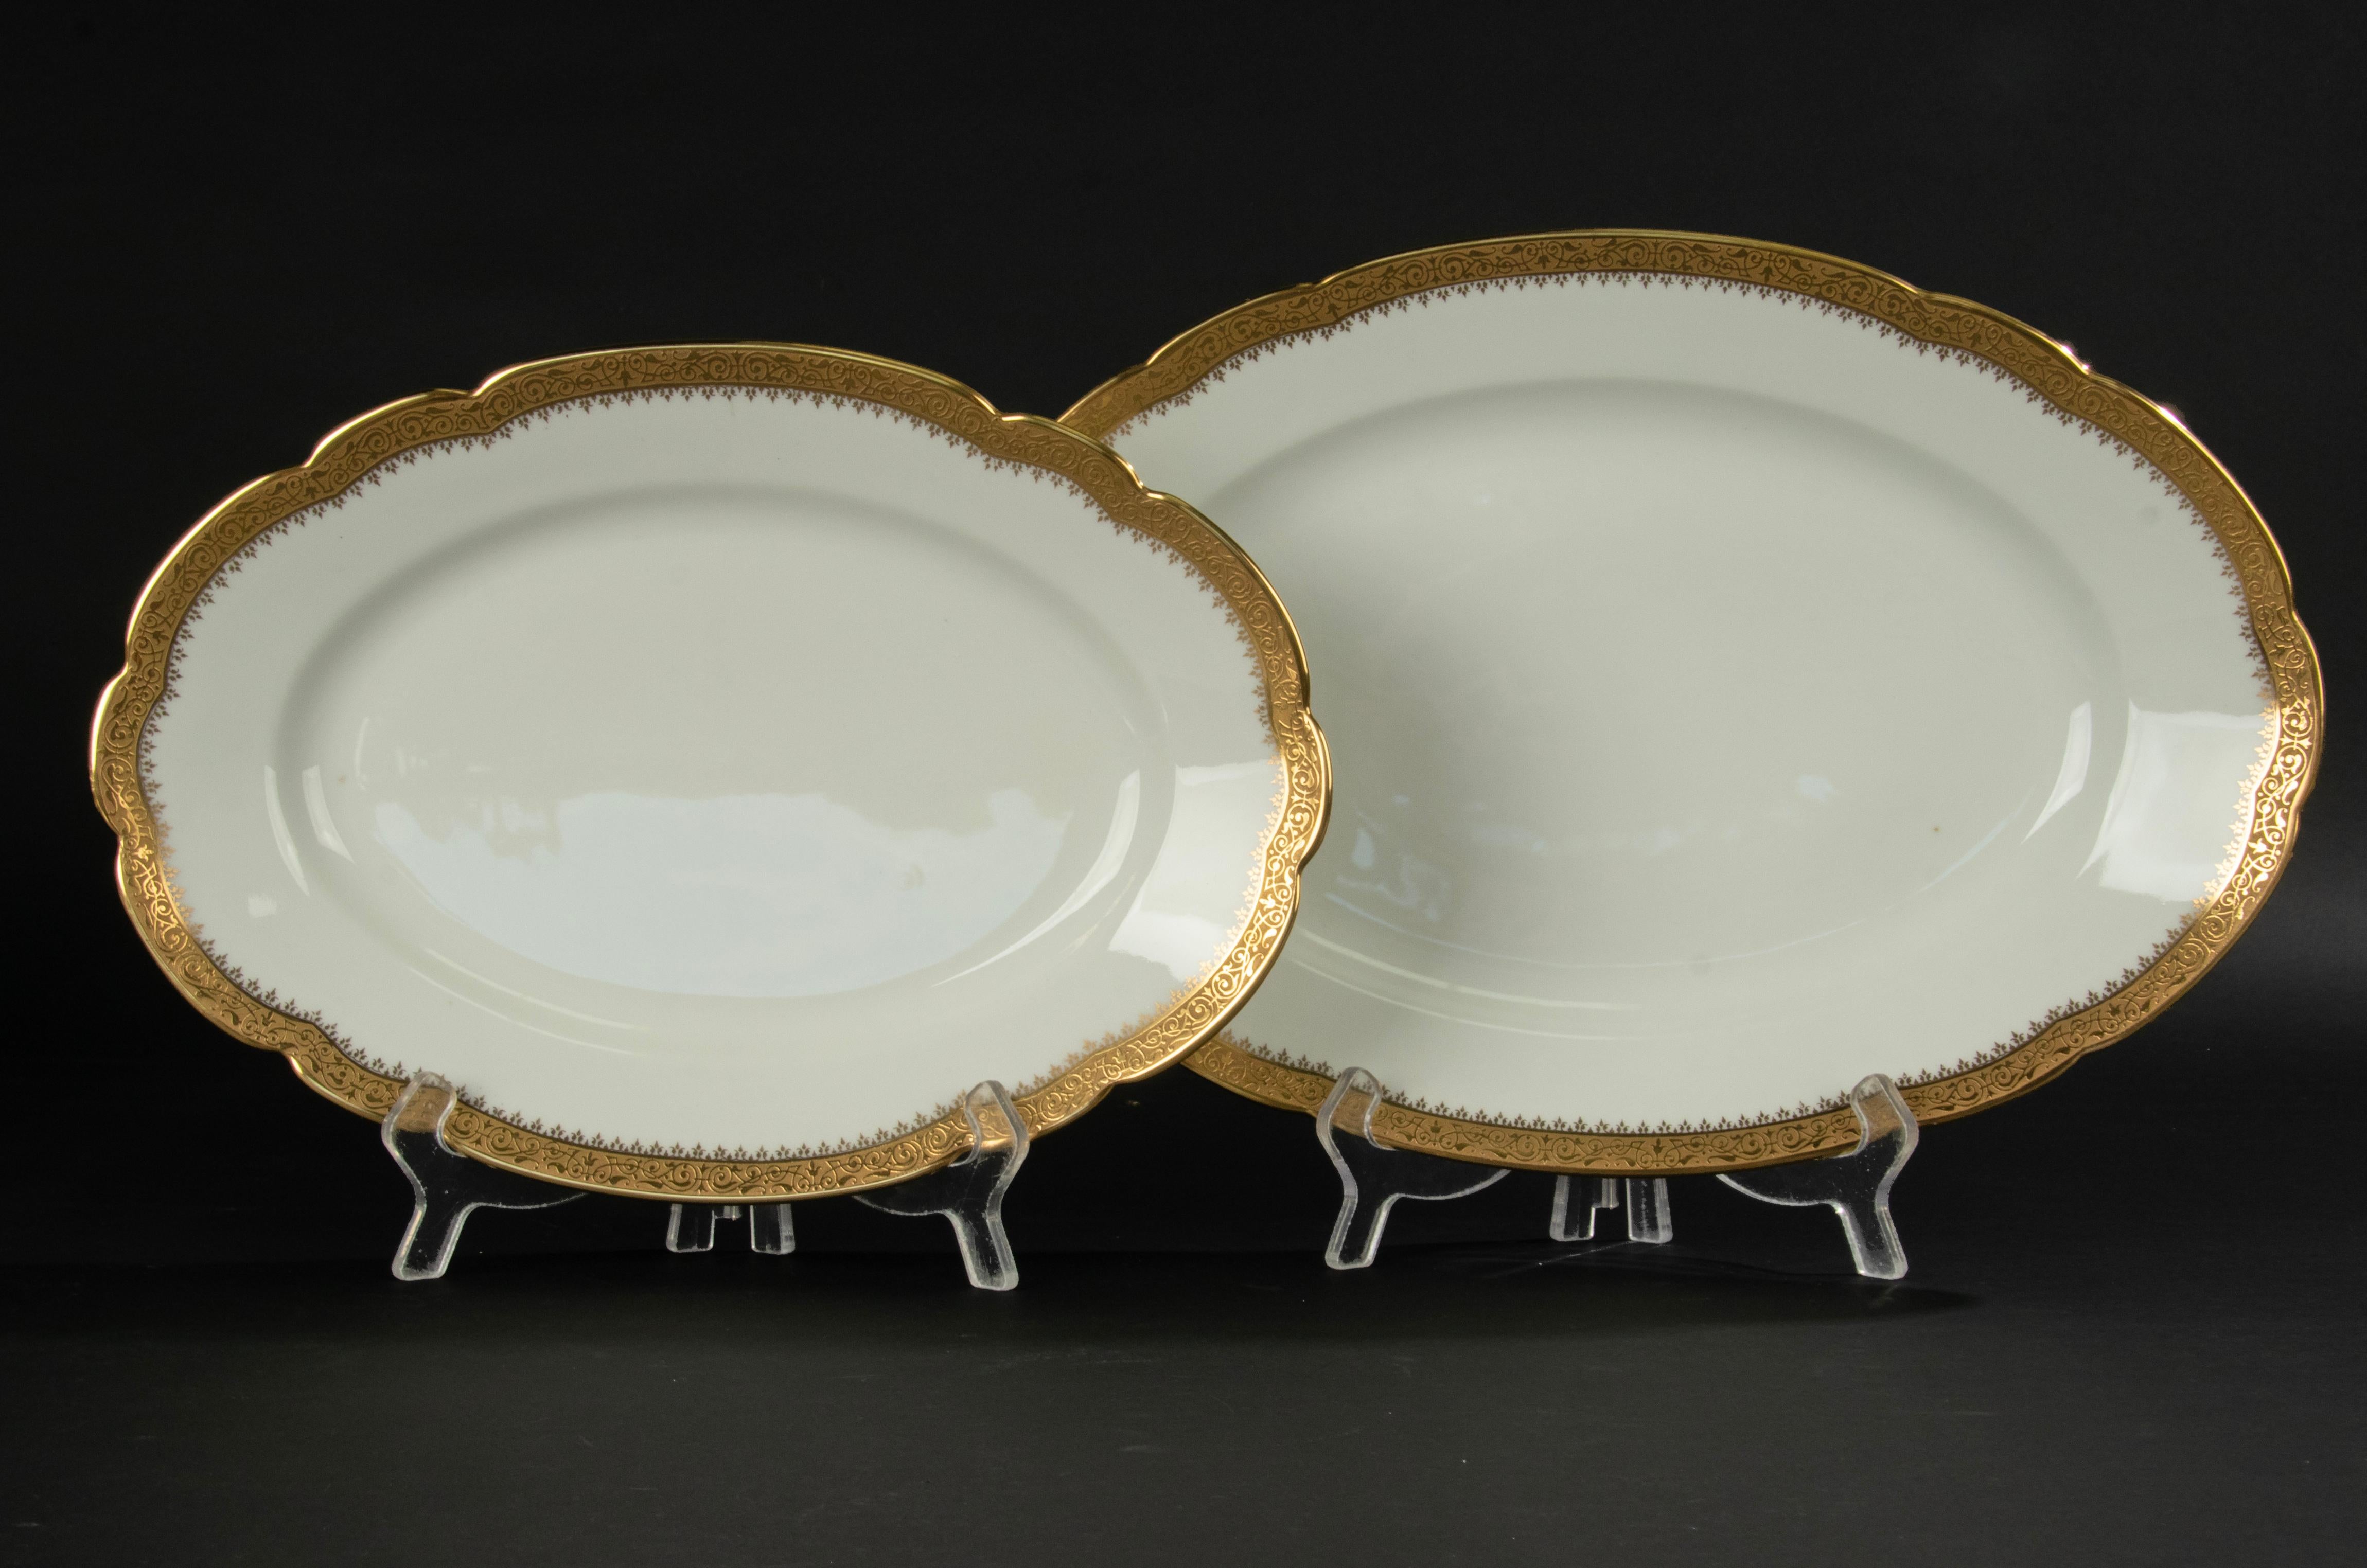 51-Piece Set Porcelain Tableware for 12 Persons - Limoges Incrusted Gold Trims 10